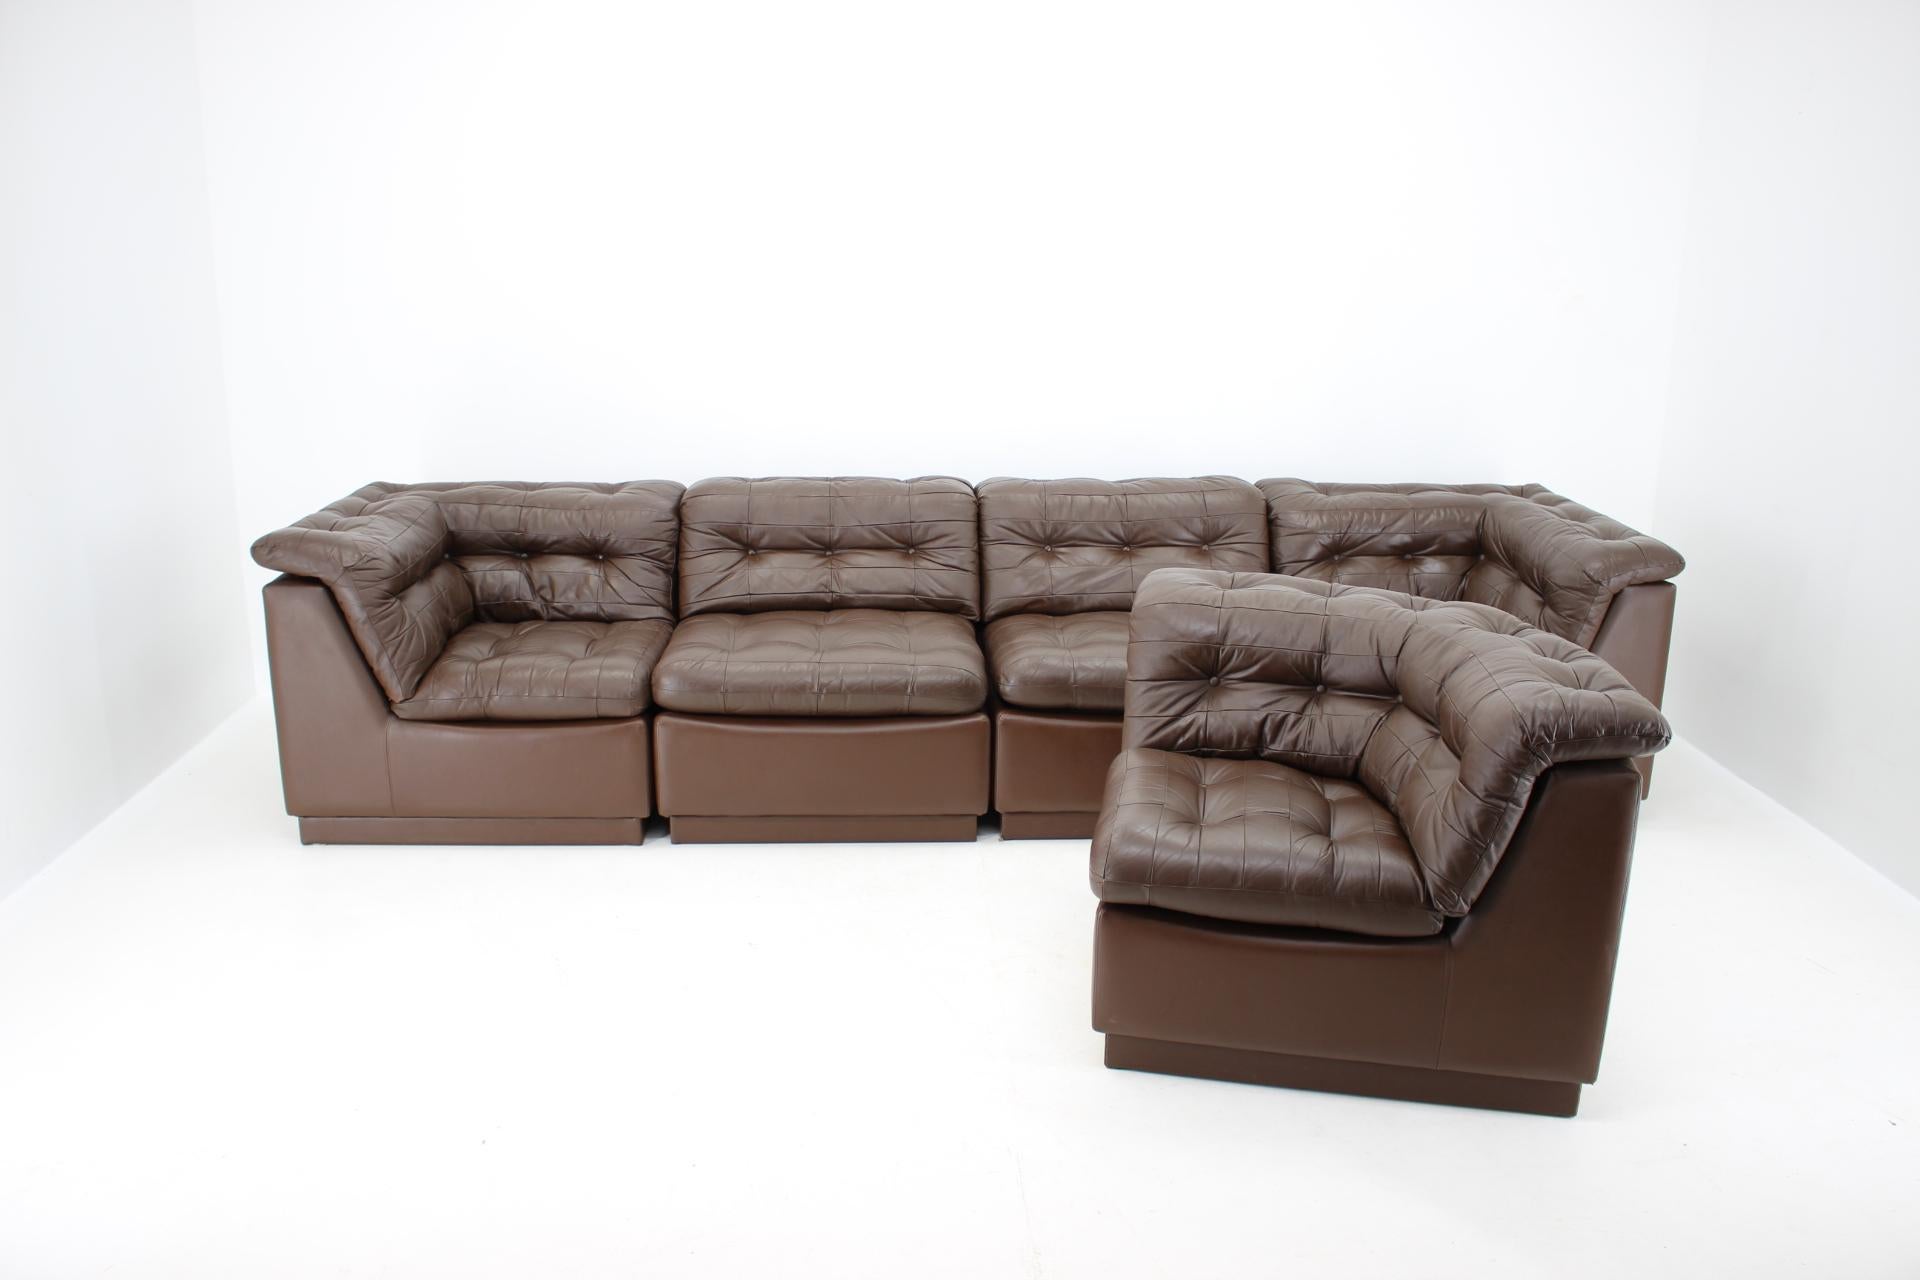 Mid-Century Modern 1970s Modular Sofa in Brown Leather, Germany